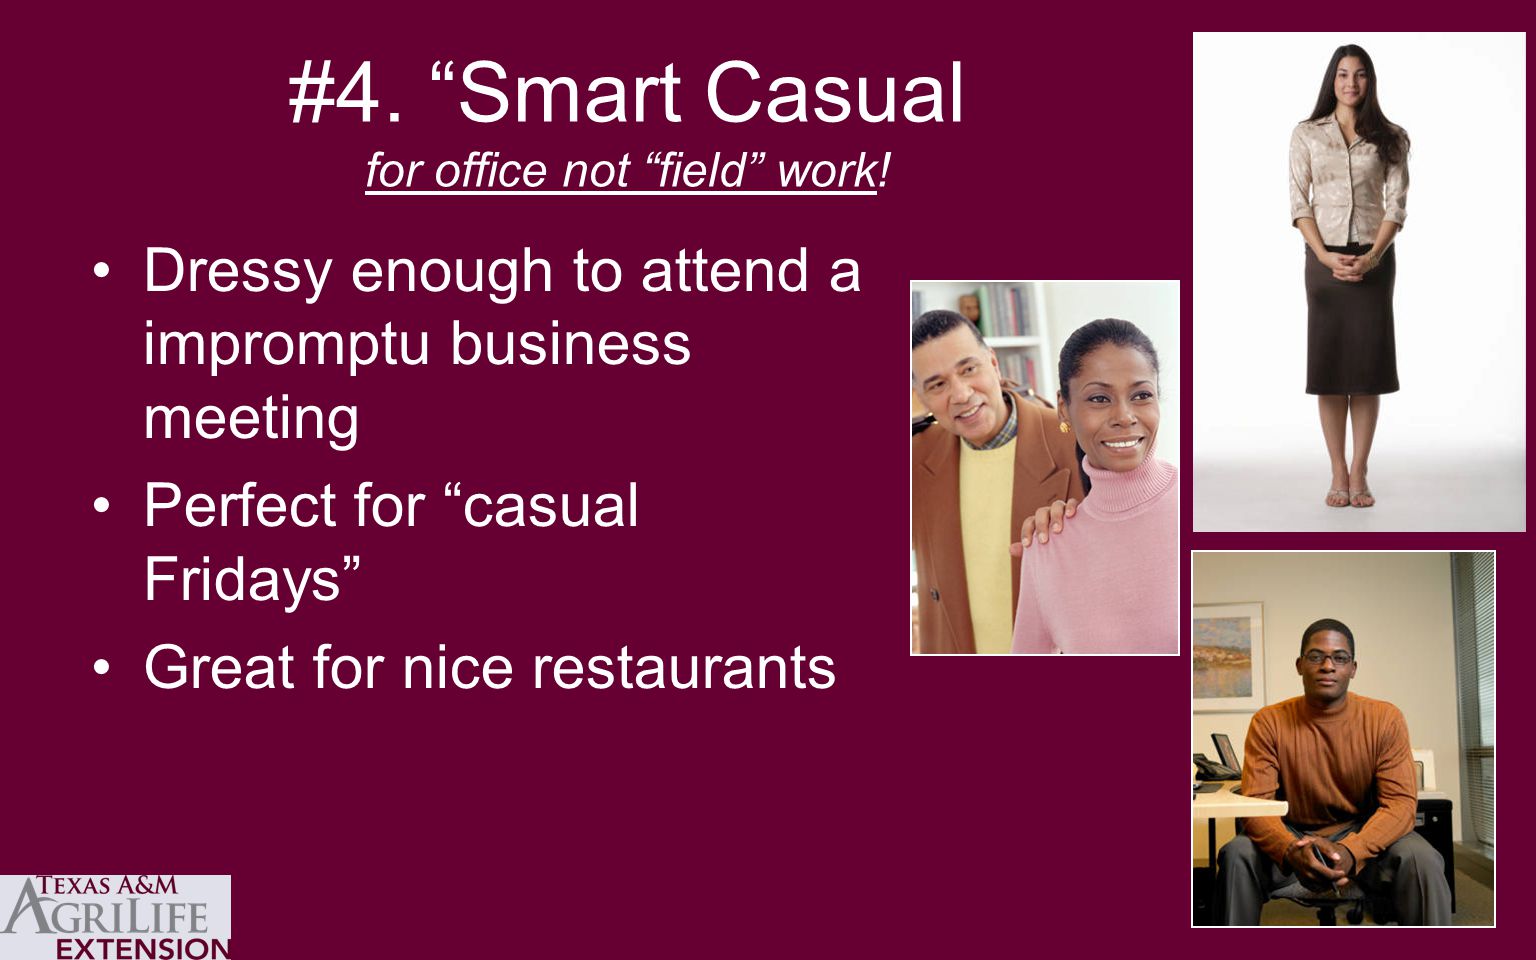 #4. Smart Casual for office not field work.